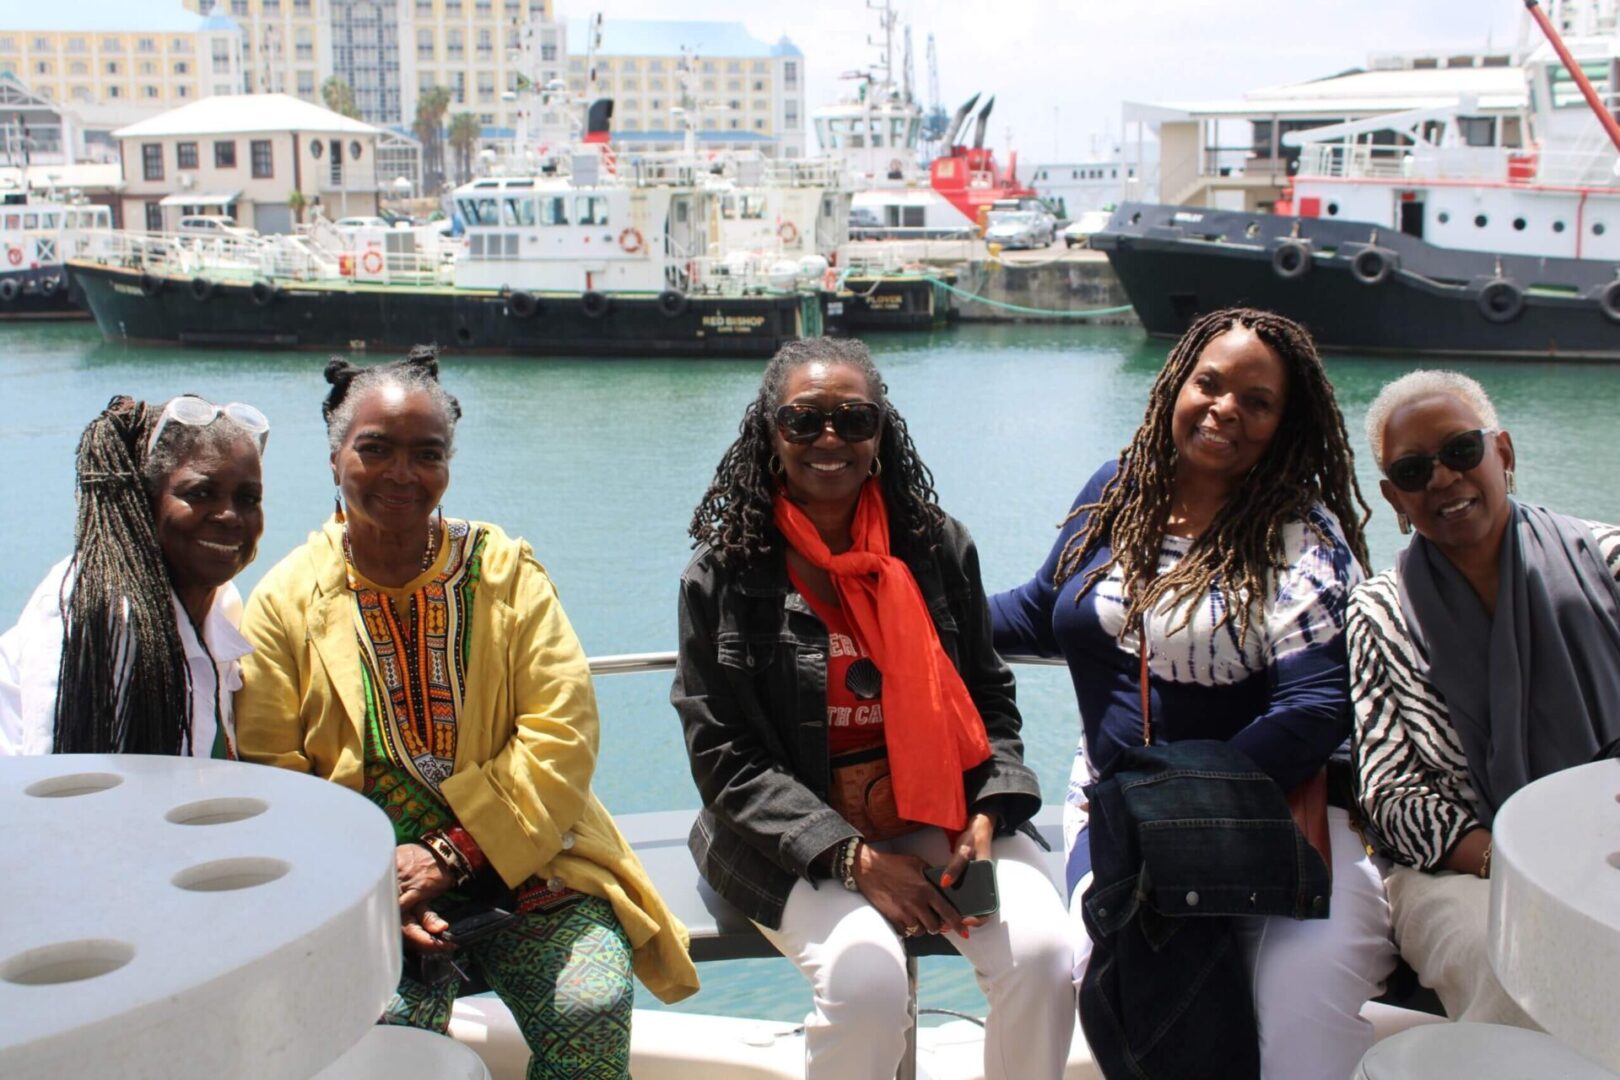 Three women sitting on a boat in front of some boats.